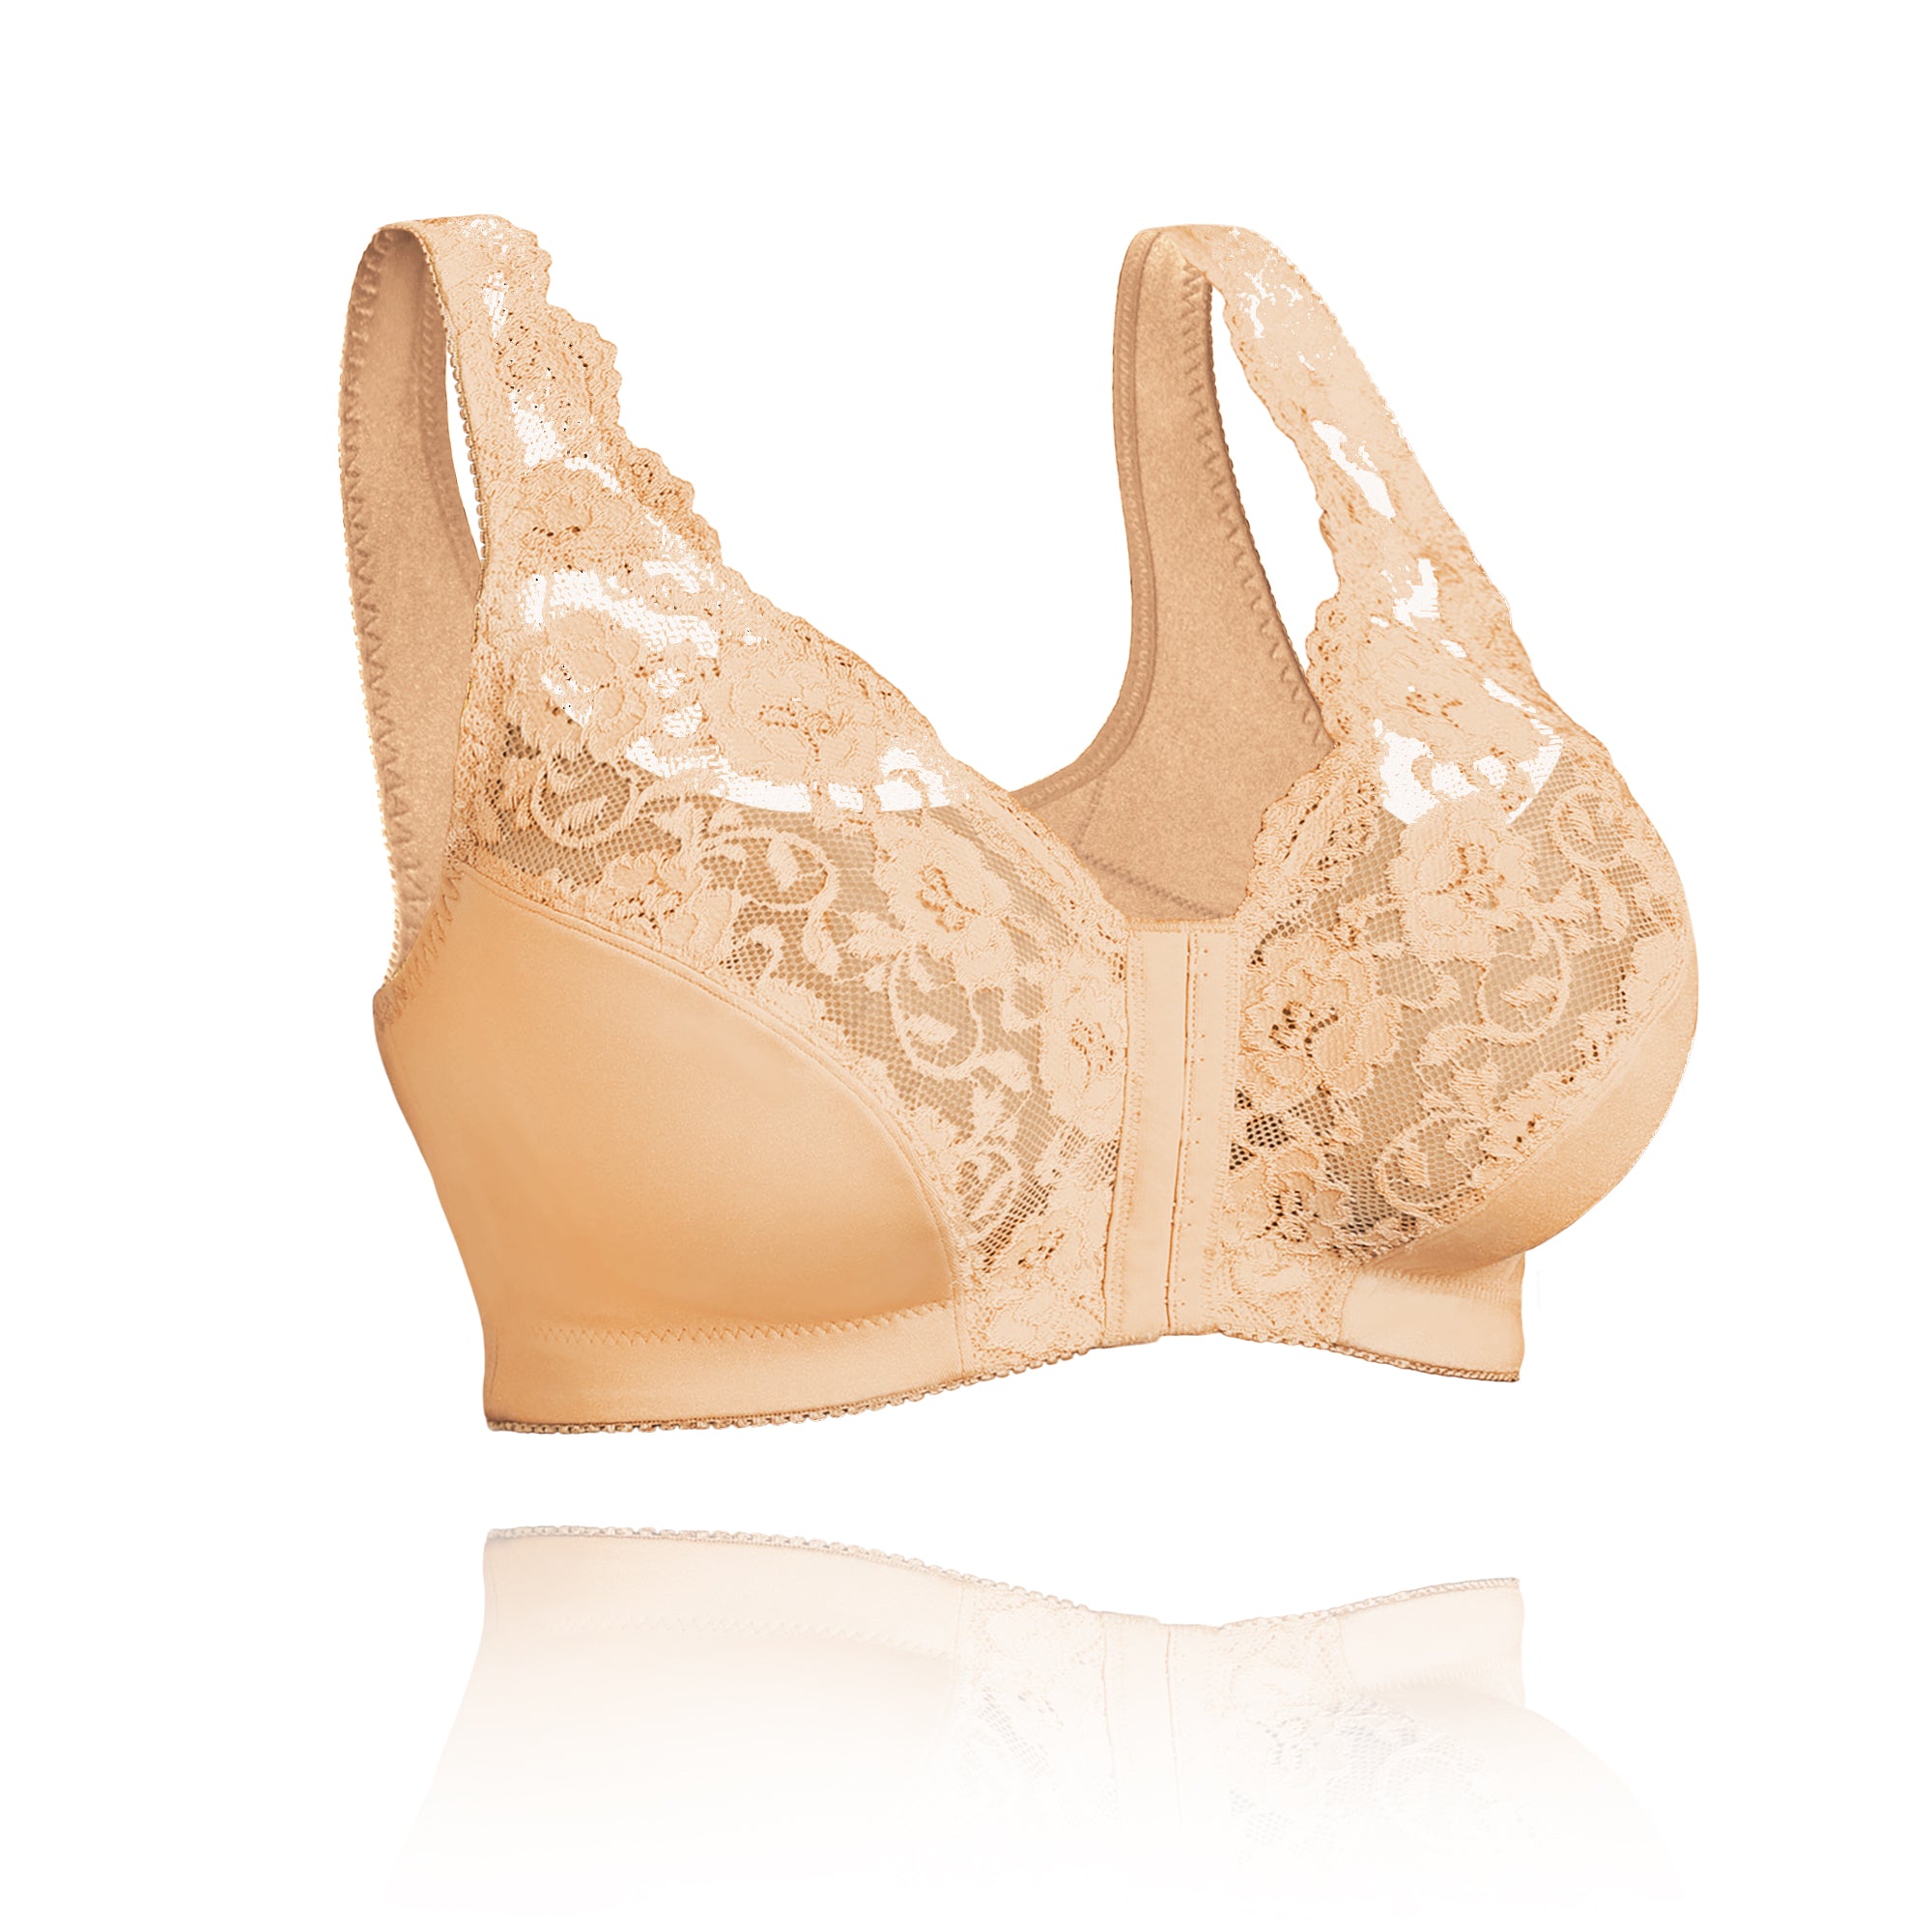 ❤️Summer Sale 50% 0ff❤️Front hooks, stretch-lace, super-lift, and posture correction – ALL IN ONE BRA!